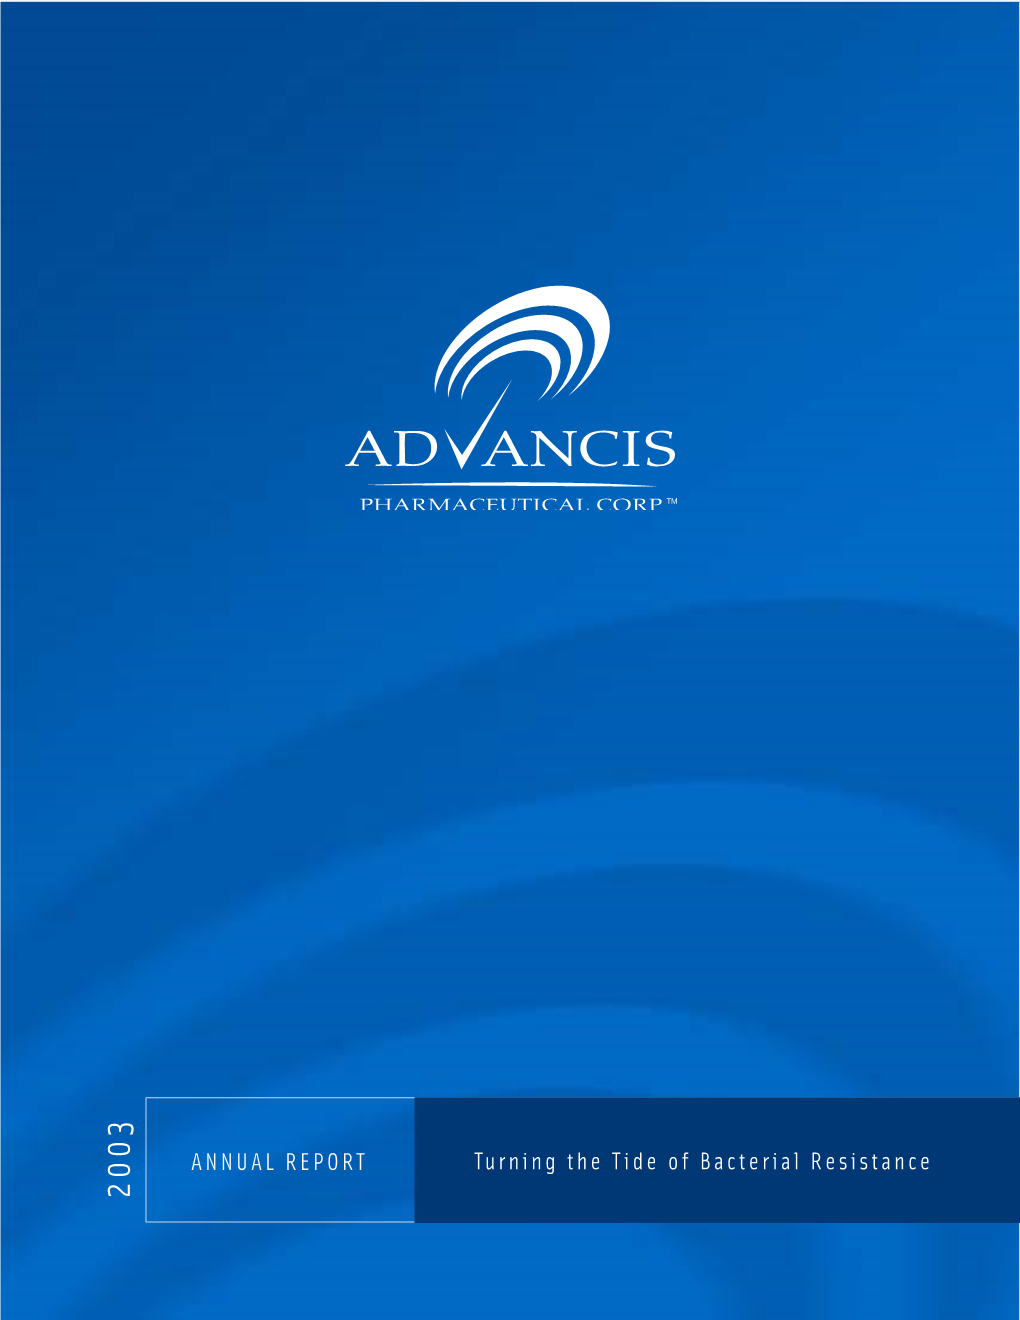 Advancis Pharmaceutical Corp. 2003 Annual Report